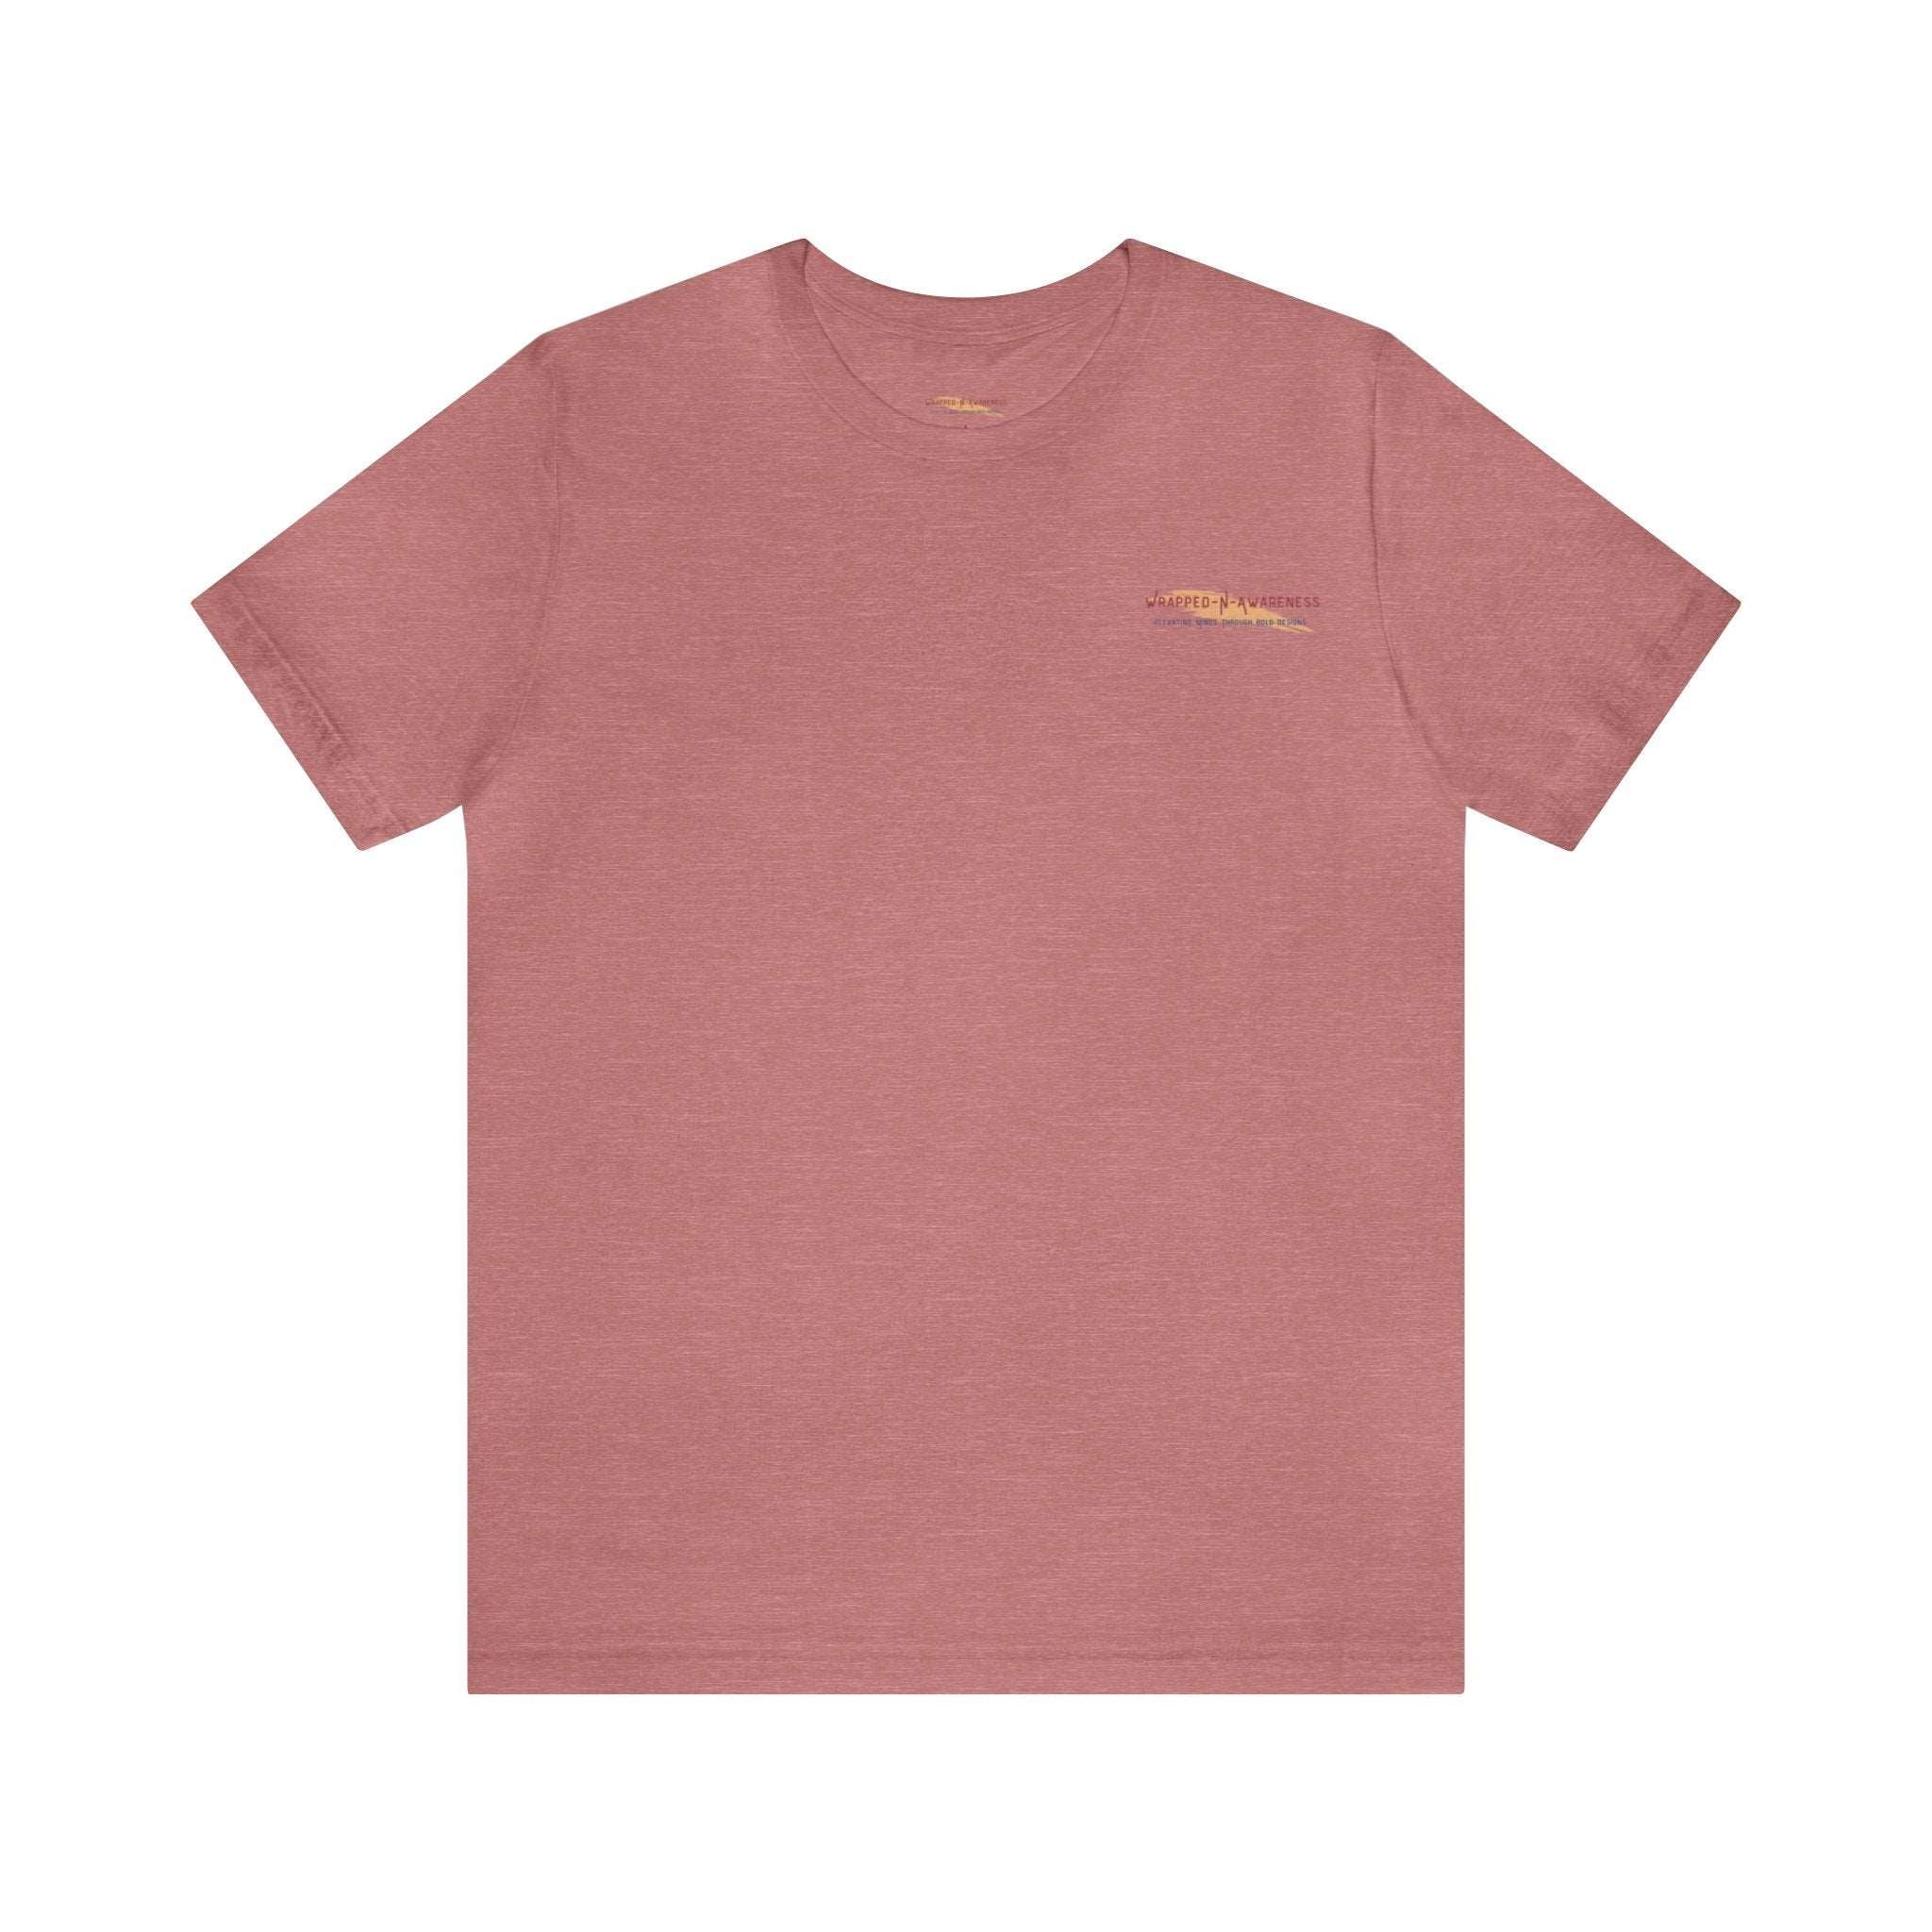 Choose Joy Daily Jersey Tee - Bella+Canvas 3001 Heather Mauve Airlume Cotton Bella+Canvas 3001 Crew Neckline Jersey Short Sleeve Lightweight Fabric Mental Health Support Retail Fit Tear-away Label Tee Unisex Tee T-Shirt 2557638774836100905_2048_3d303f0d-e7dd-4388-a2a2-8f96e79e5d49 Printify